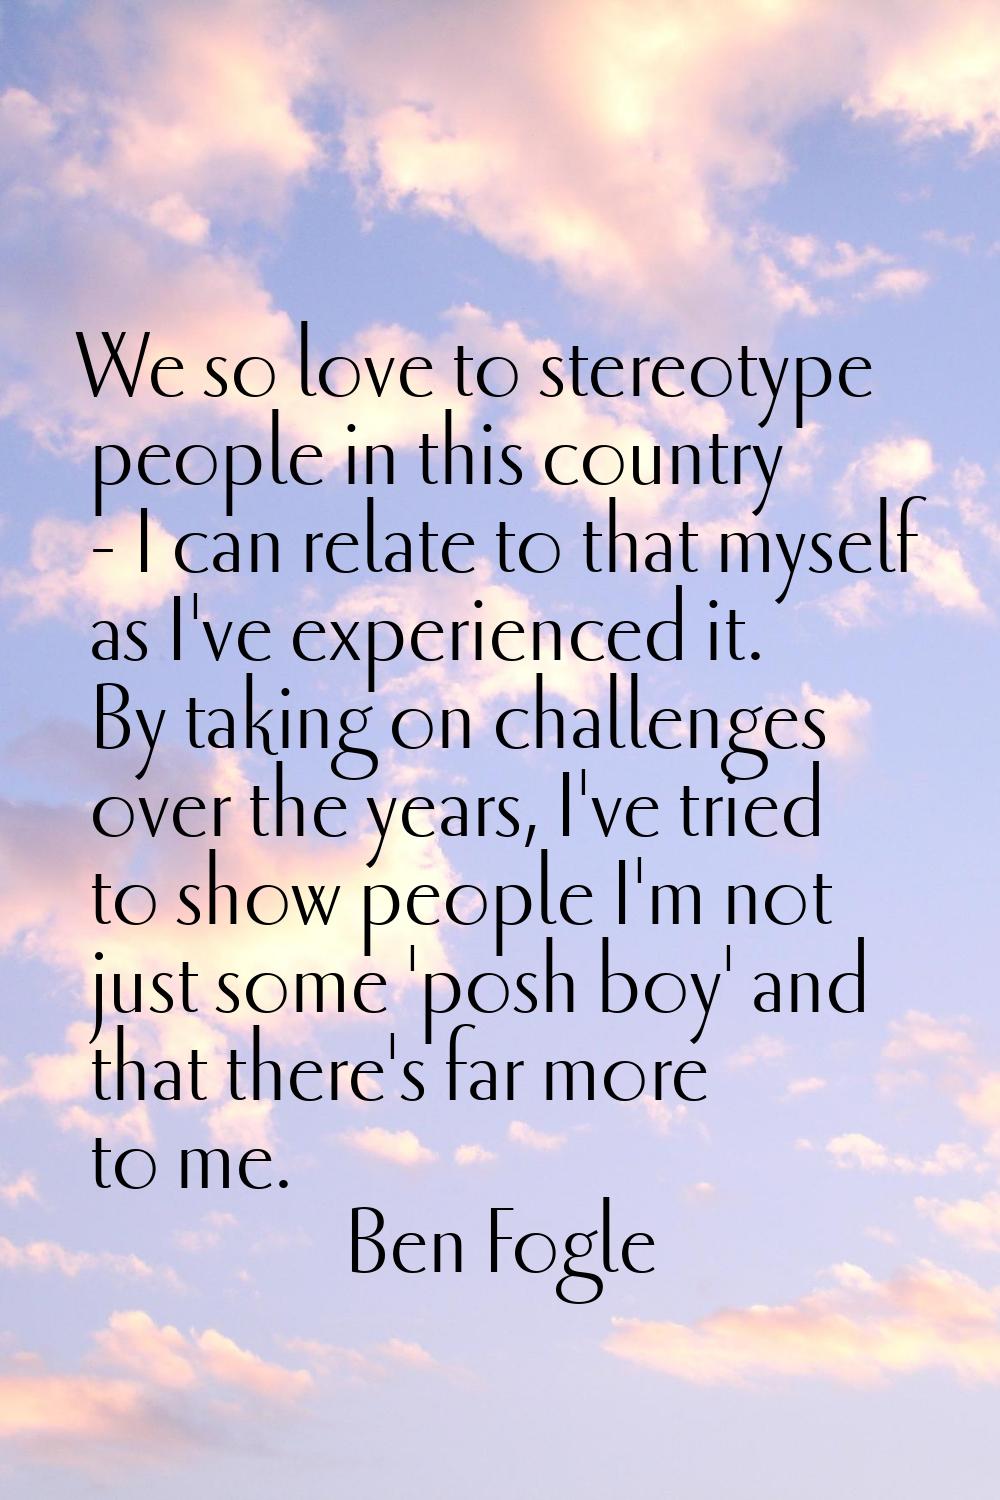 We so love to stereotype people in this country - I can relate to that myself as I've experienced i